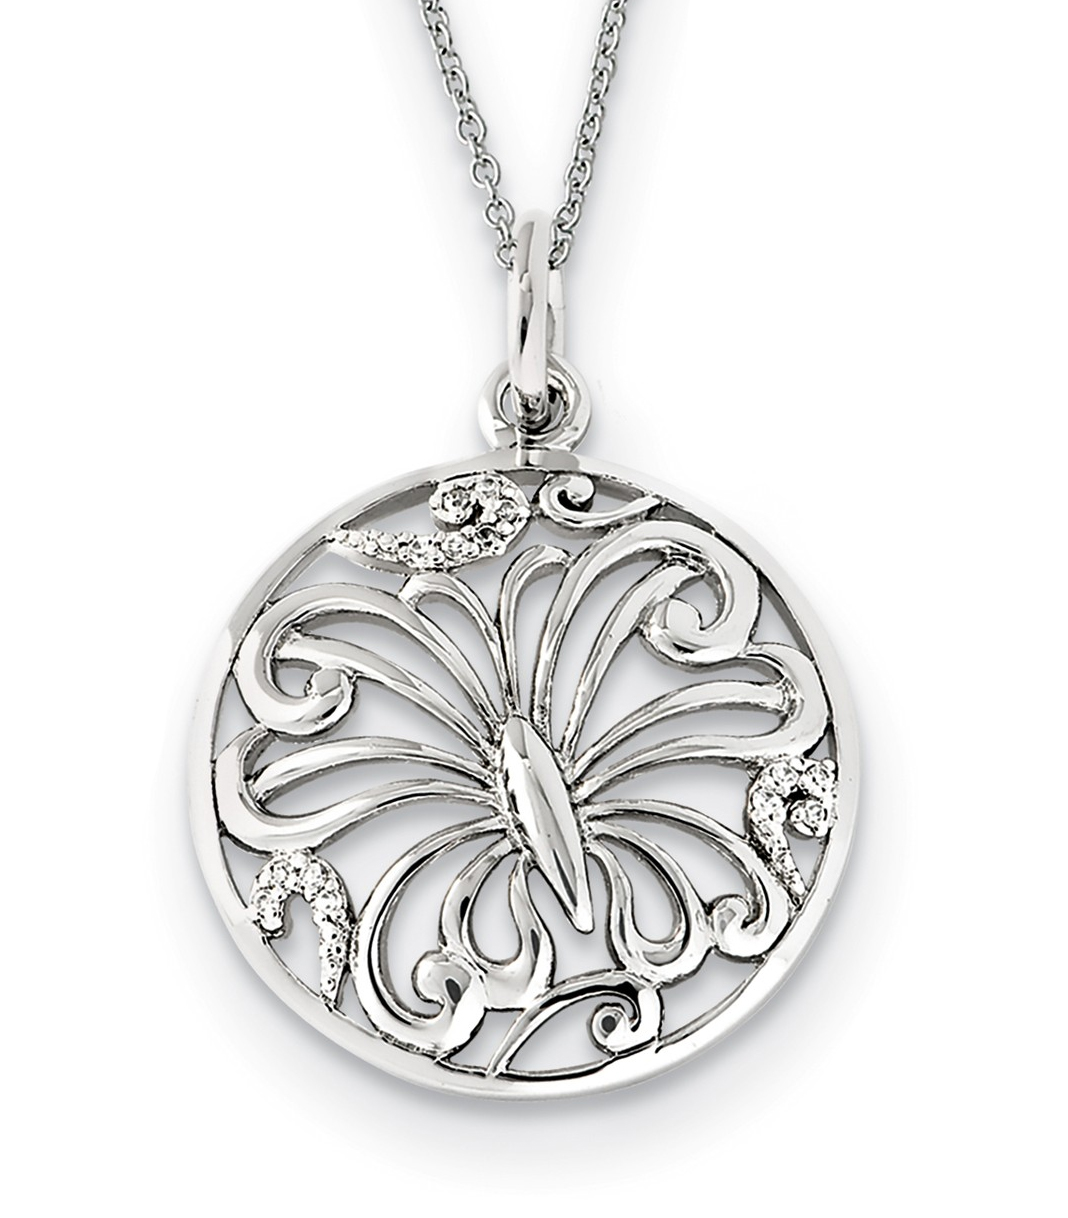  'Miracles Butterfly' CZ Pendant Necklace, Antiqued Rhodium-Plated Sterling Silver, 18